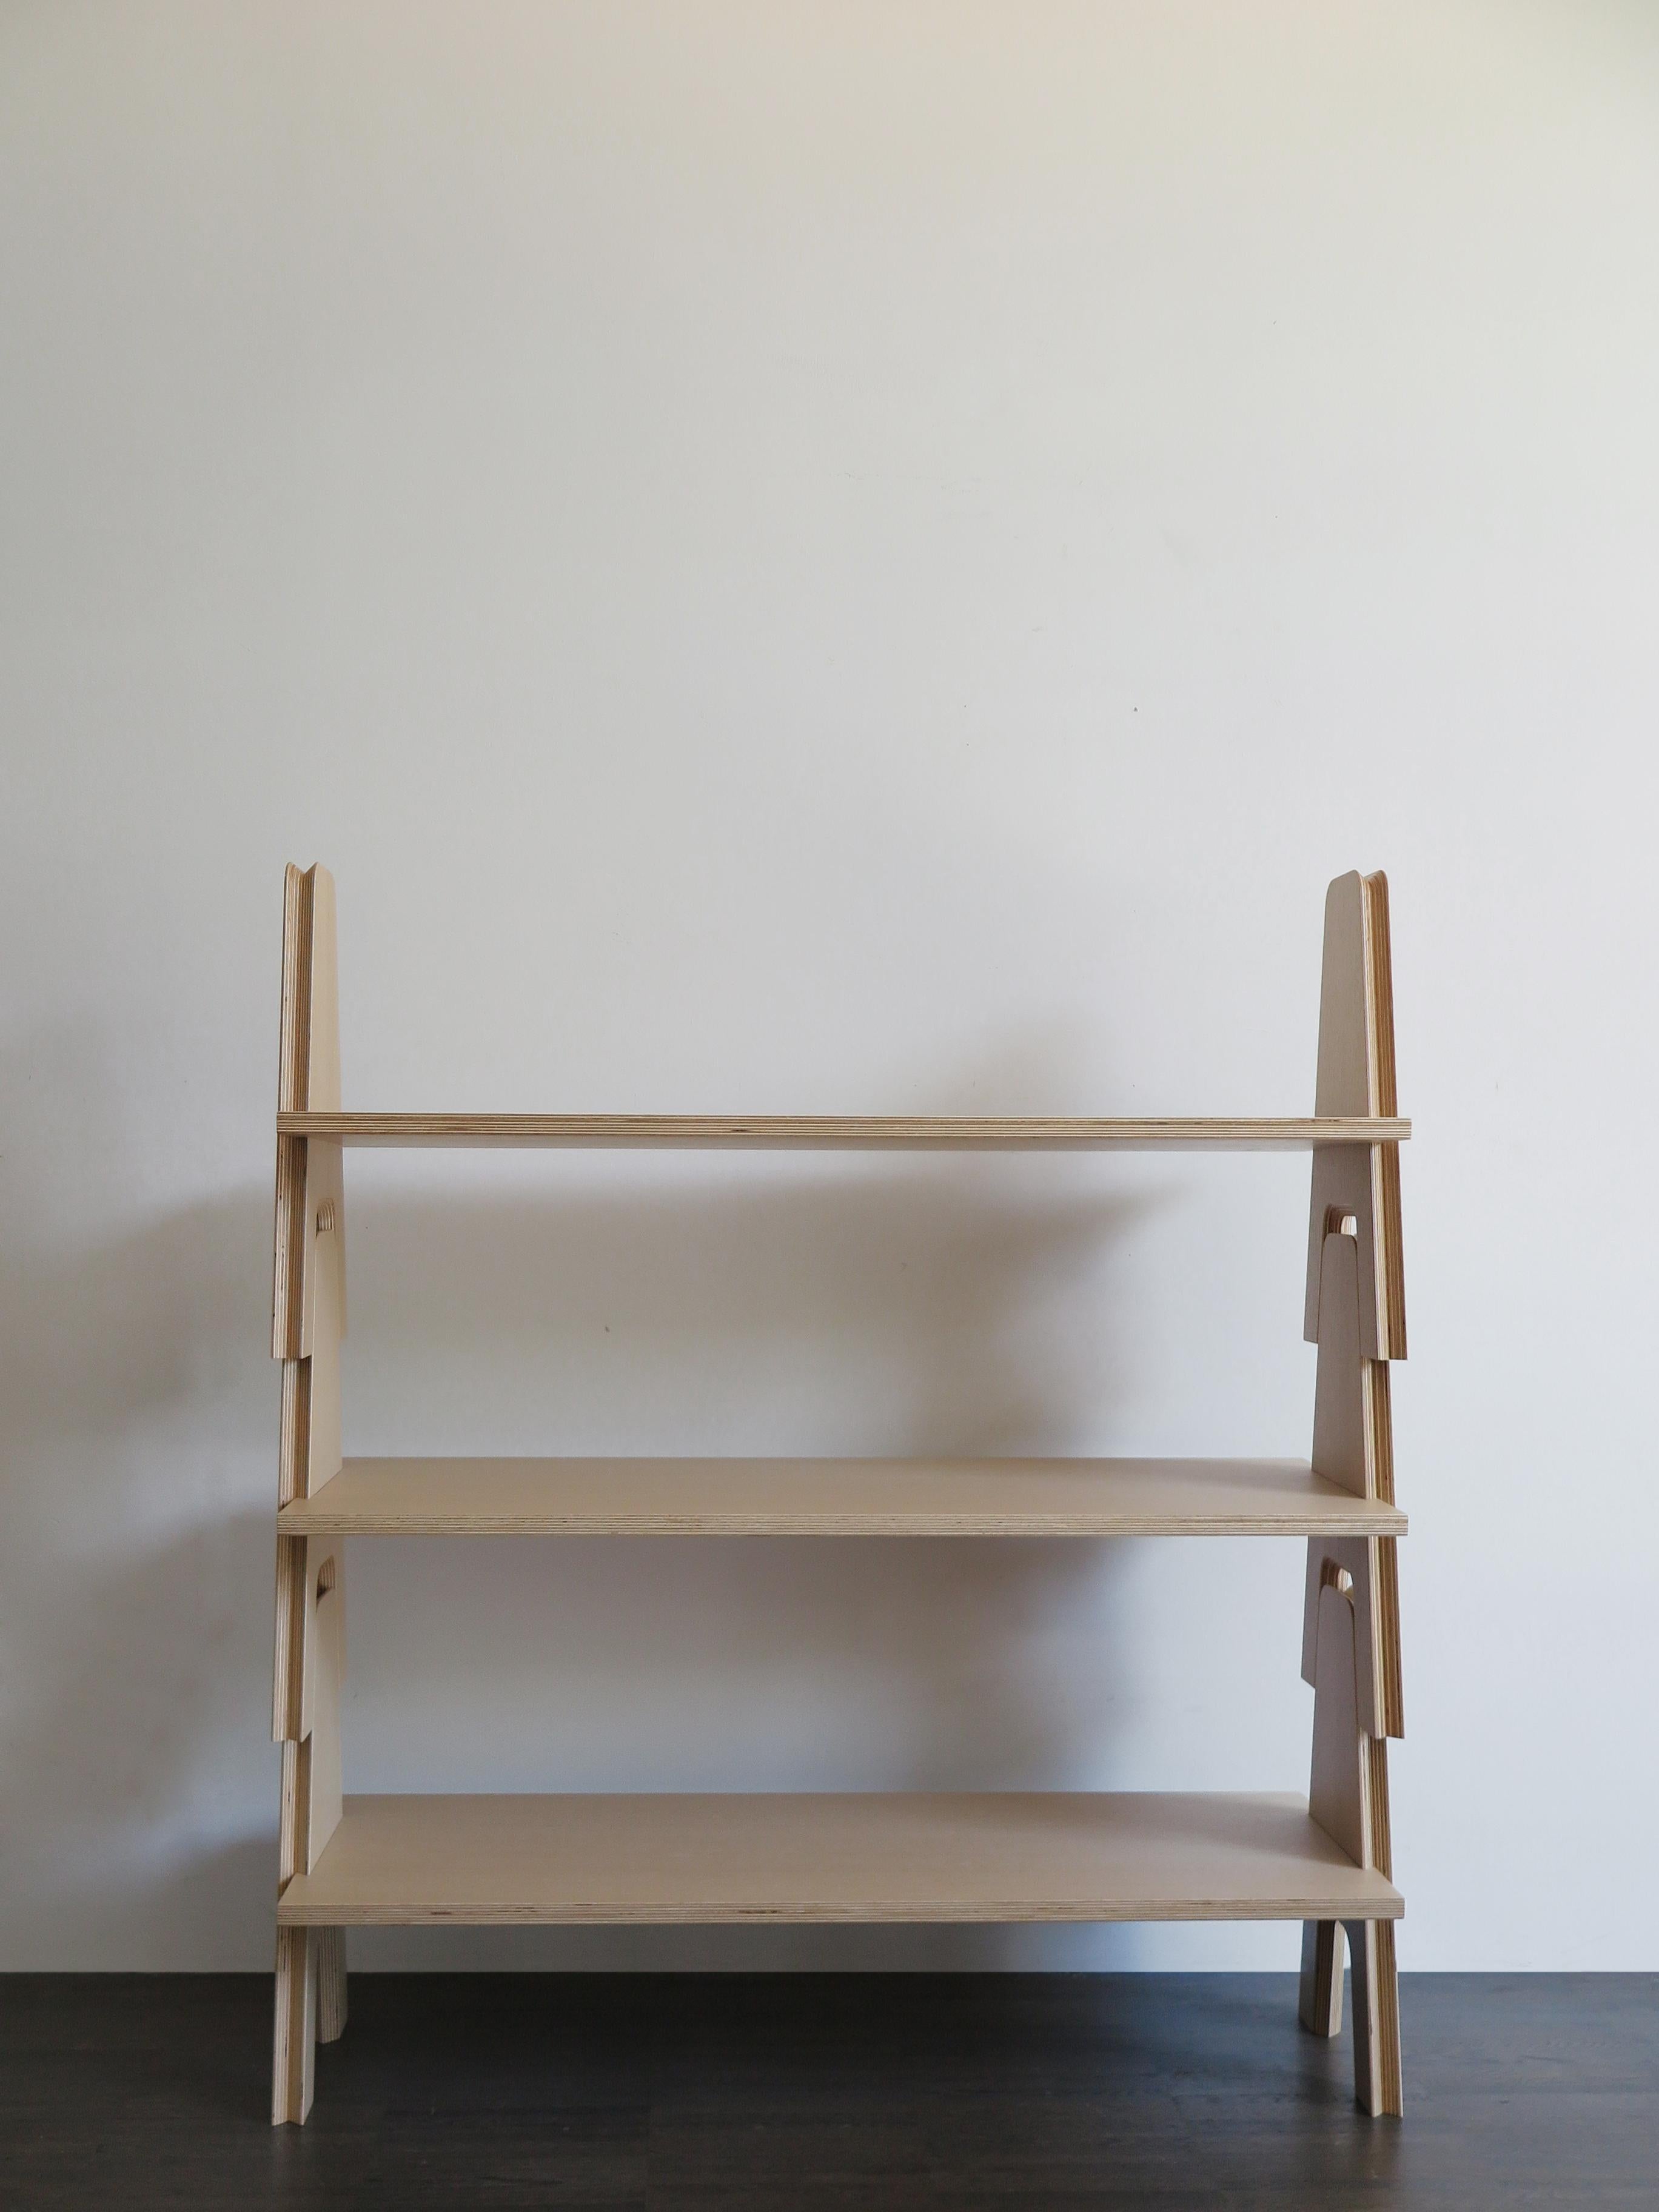 A furnishing system made entirely of wood, designed by Angelo Mangiarotti in 1953.
Its distinctive feature is a trestle in the shape of an upturned “V”, which means it is superimposable by means of a siply gravity joint, and whose special perimeter